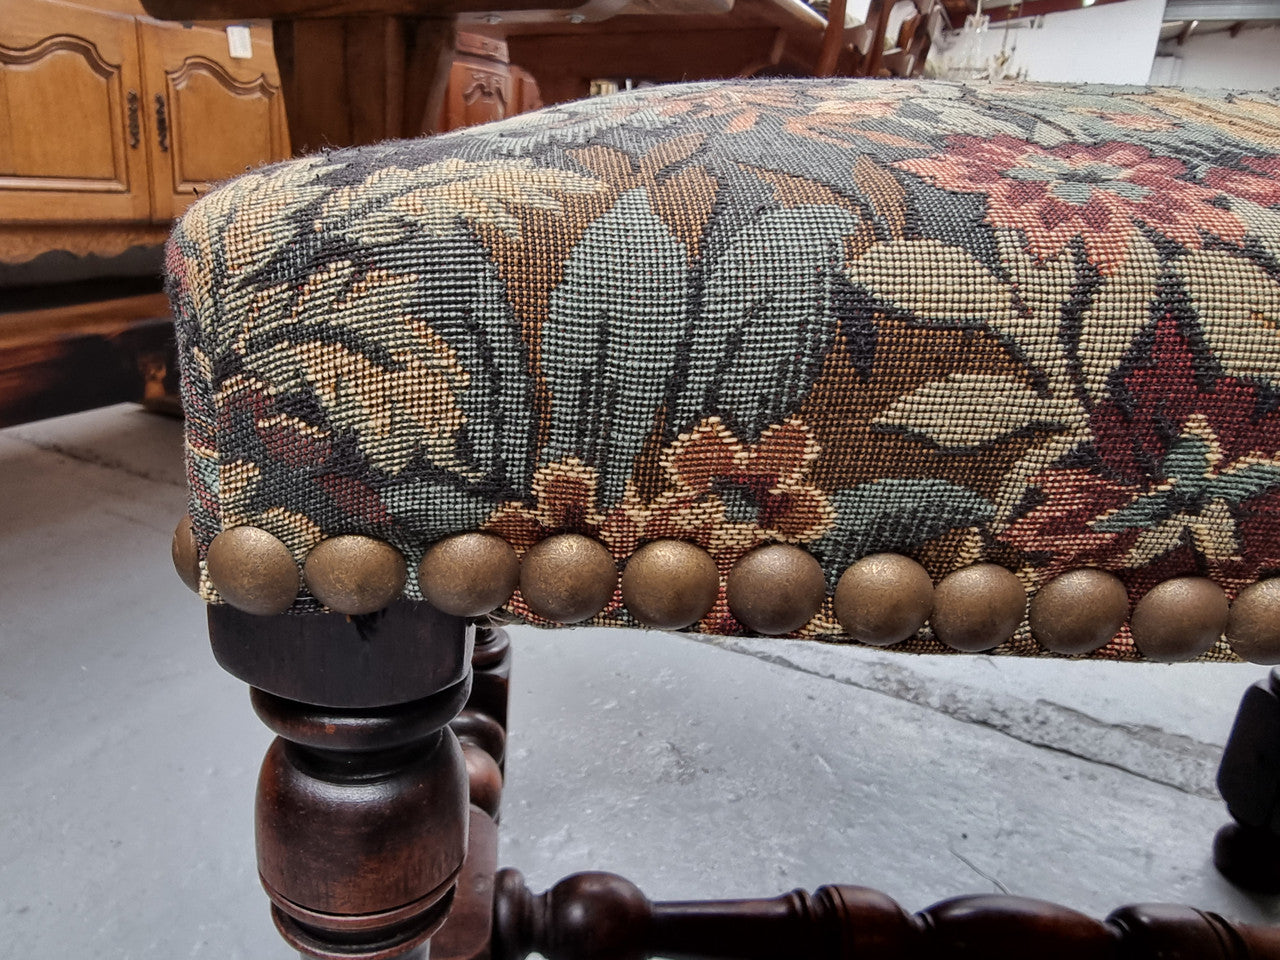 Flemish Baroque Style Walnut Footstool with Tapestry Fabric Top